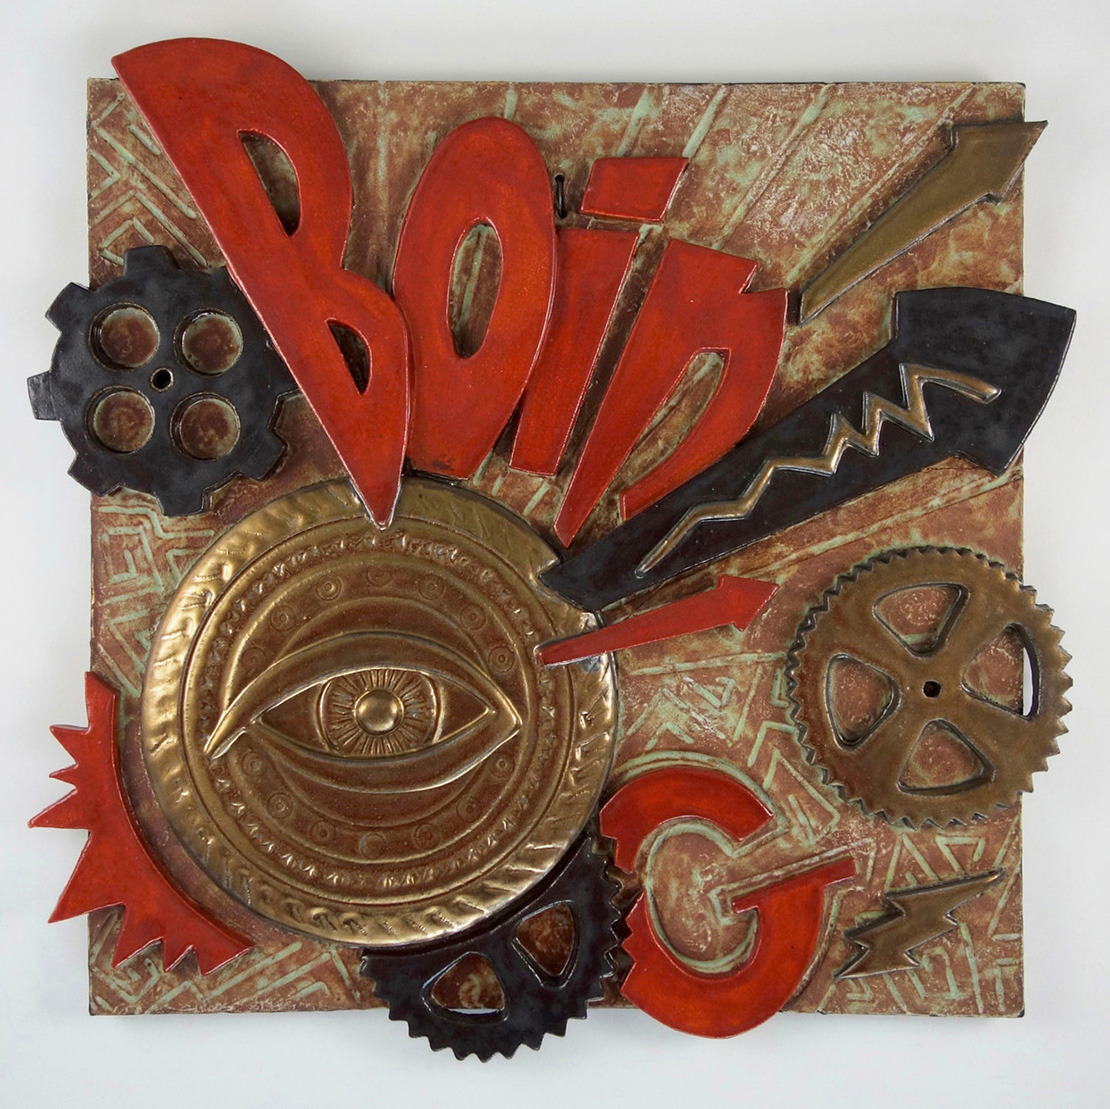  a wall plaque with the word "BOING" in red lettering with metal and black colored cog wheels with arrows pointing off the side of the gold eye under the word.